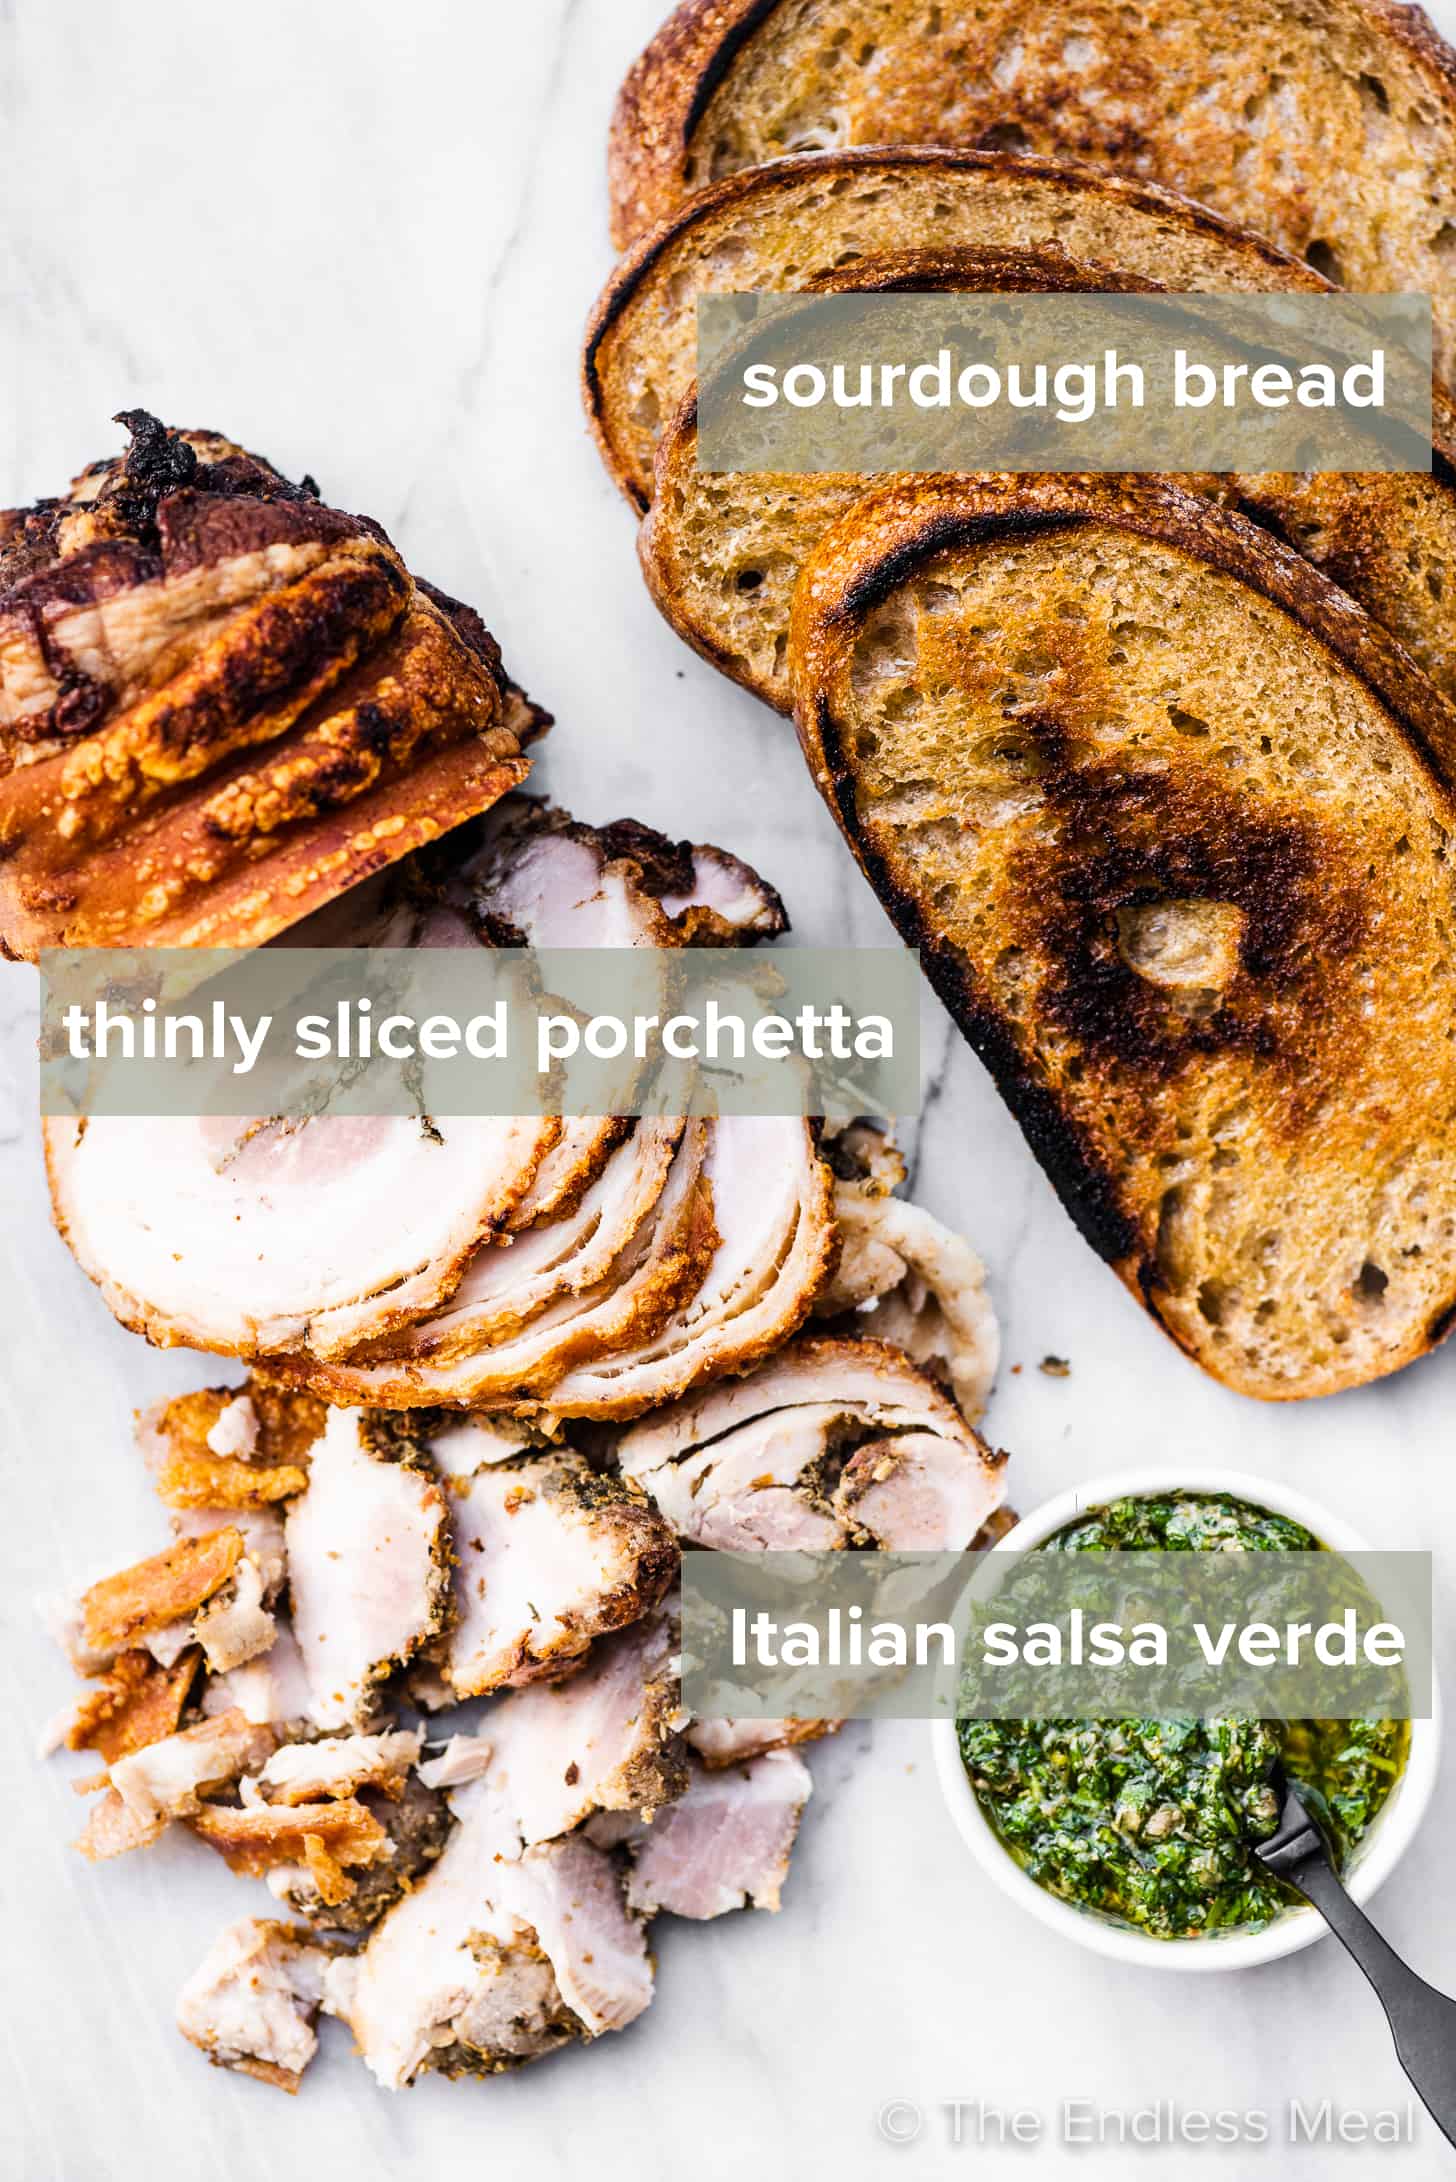 The ingredients needed to make a porchetta sandwich laid out on a countertop.